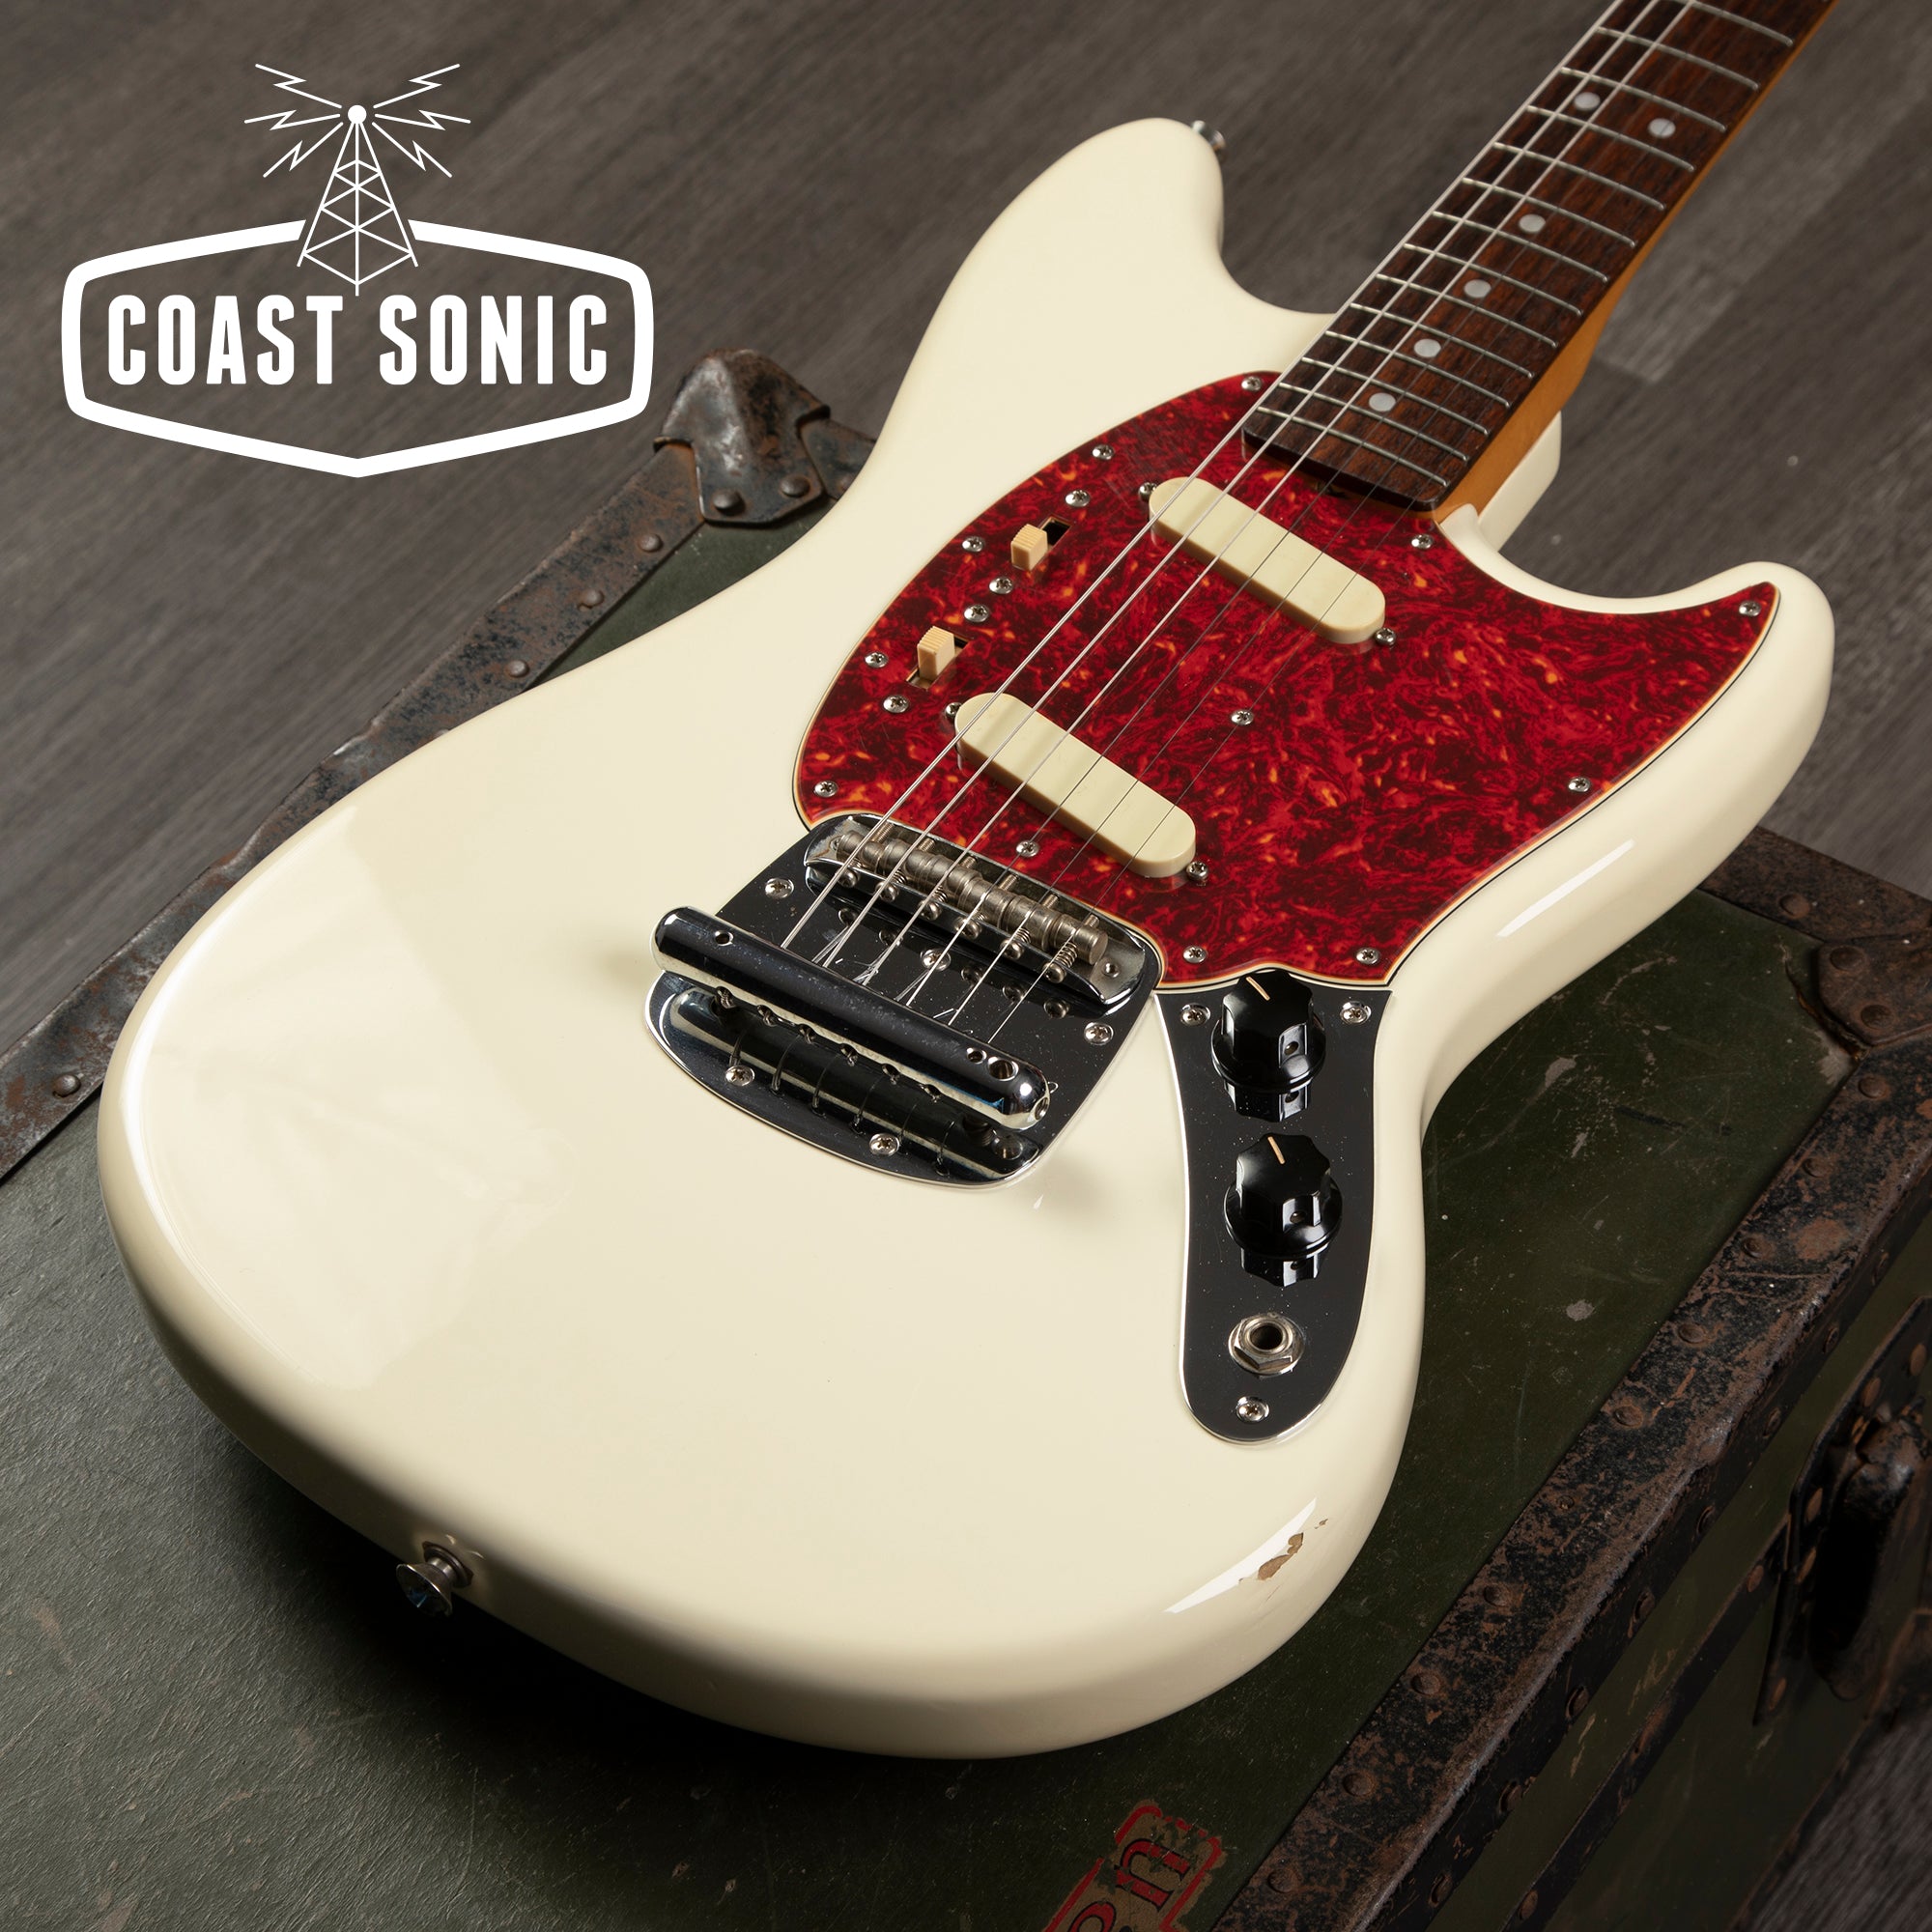 2006 Fender CIJ '65 Mustang Reissue Olympic White MG65 W/ Upgraded Electronics